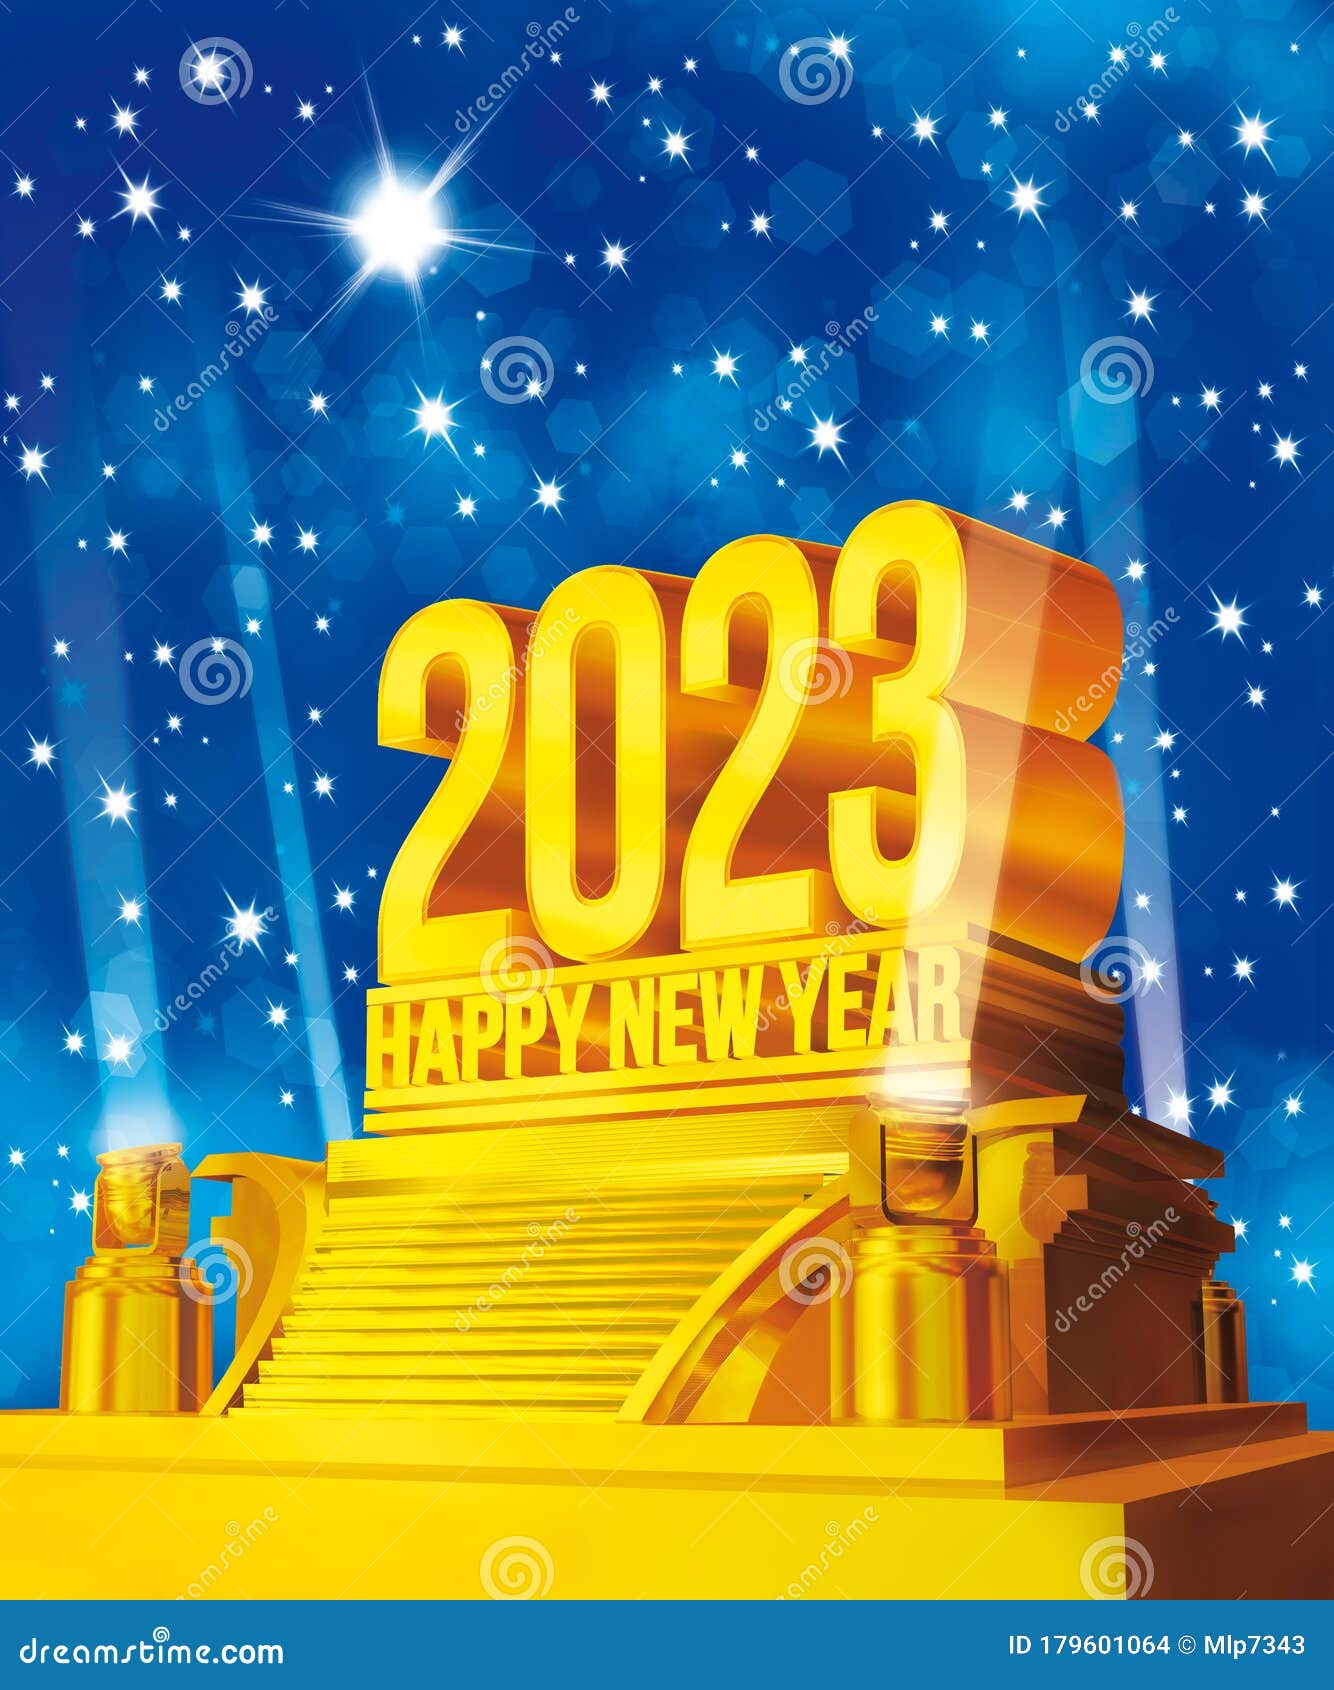 Golden Happy New Year 2023 on a Platform Against Starry Night Background  Stock Illustration - Illustration of festive, greeting: 179601064